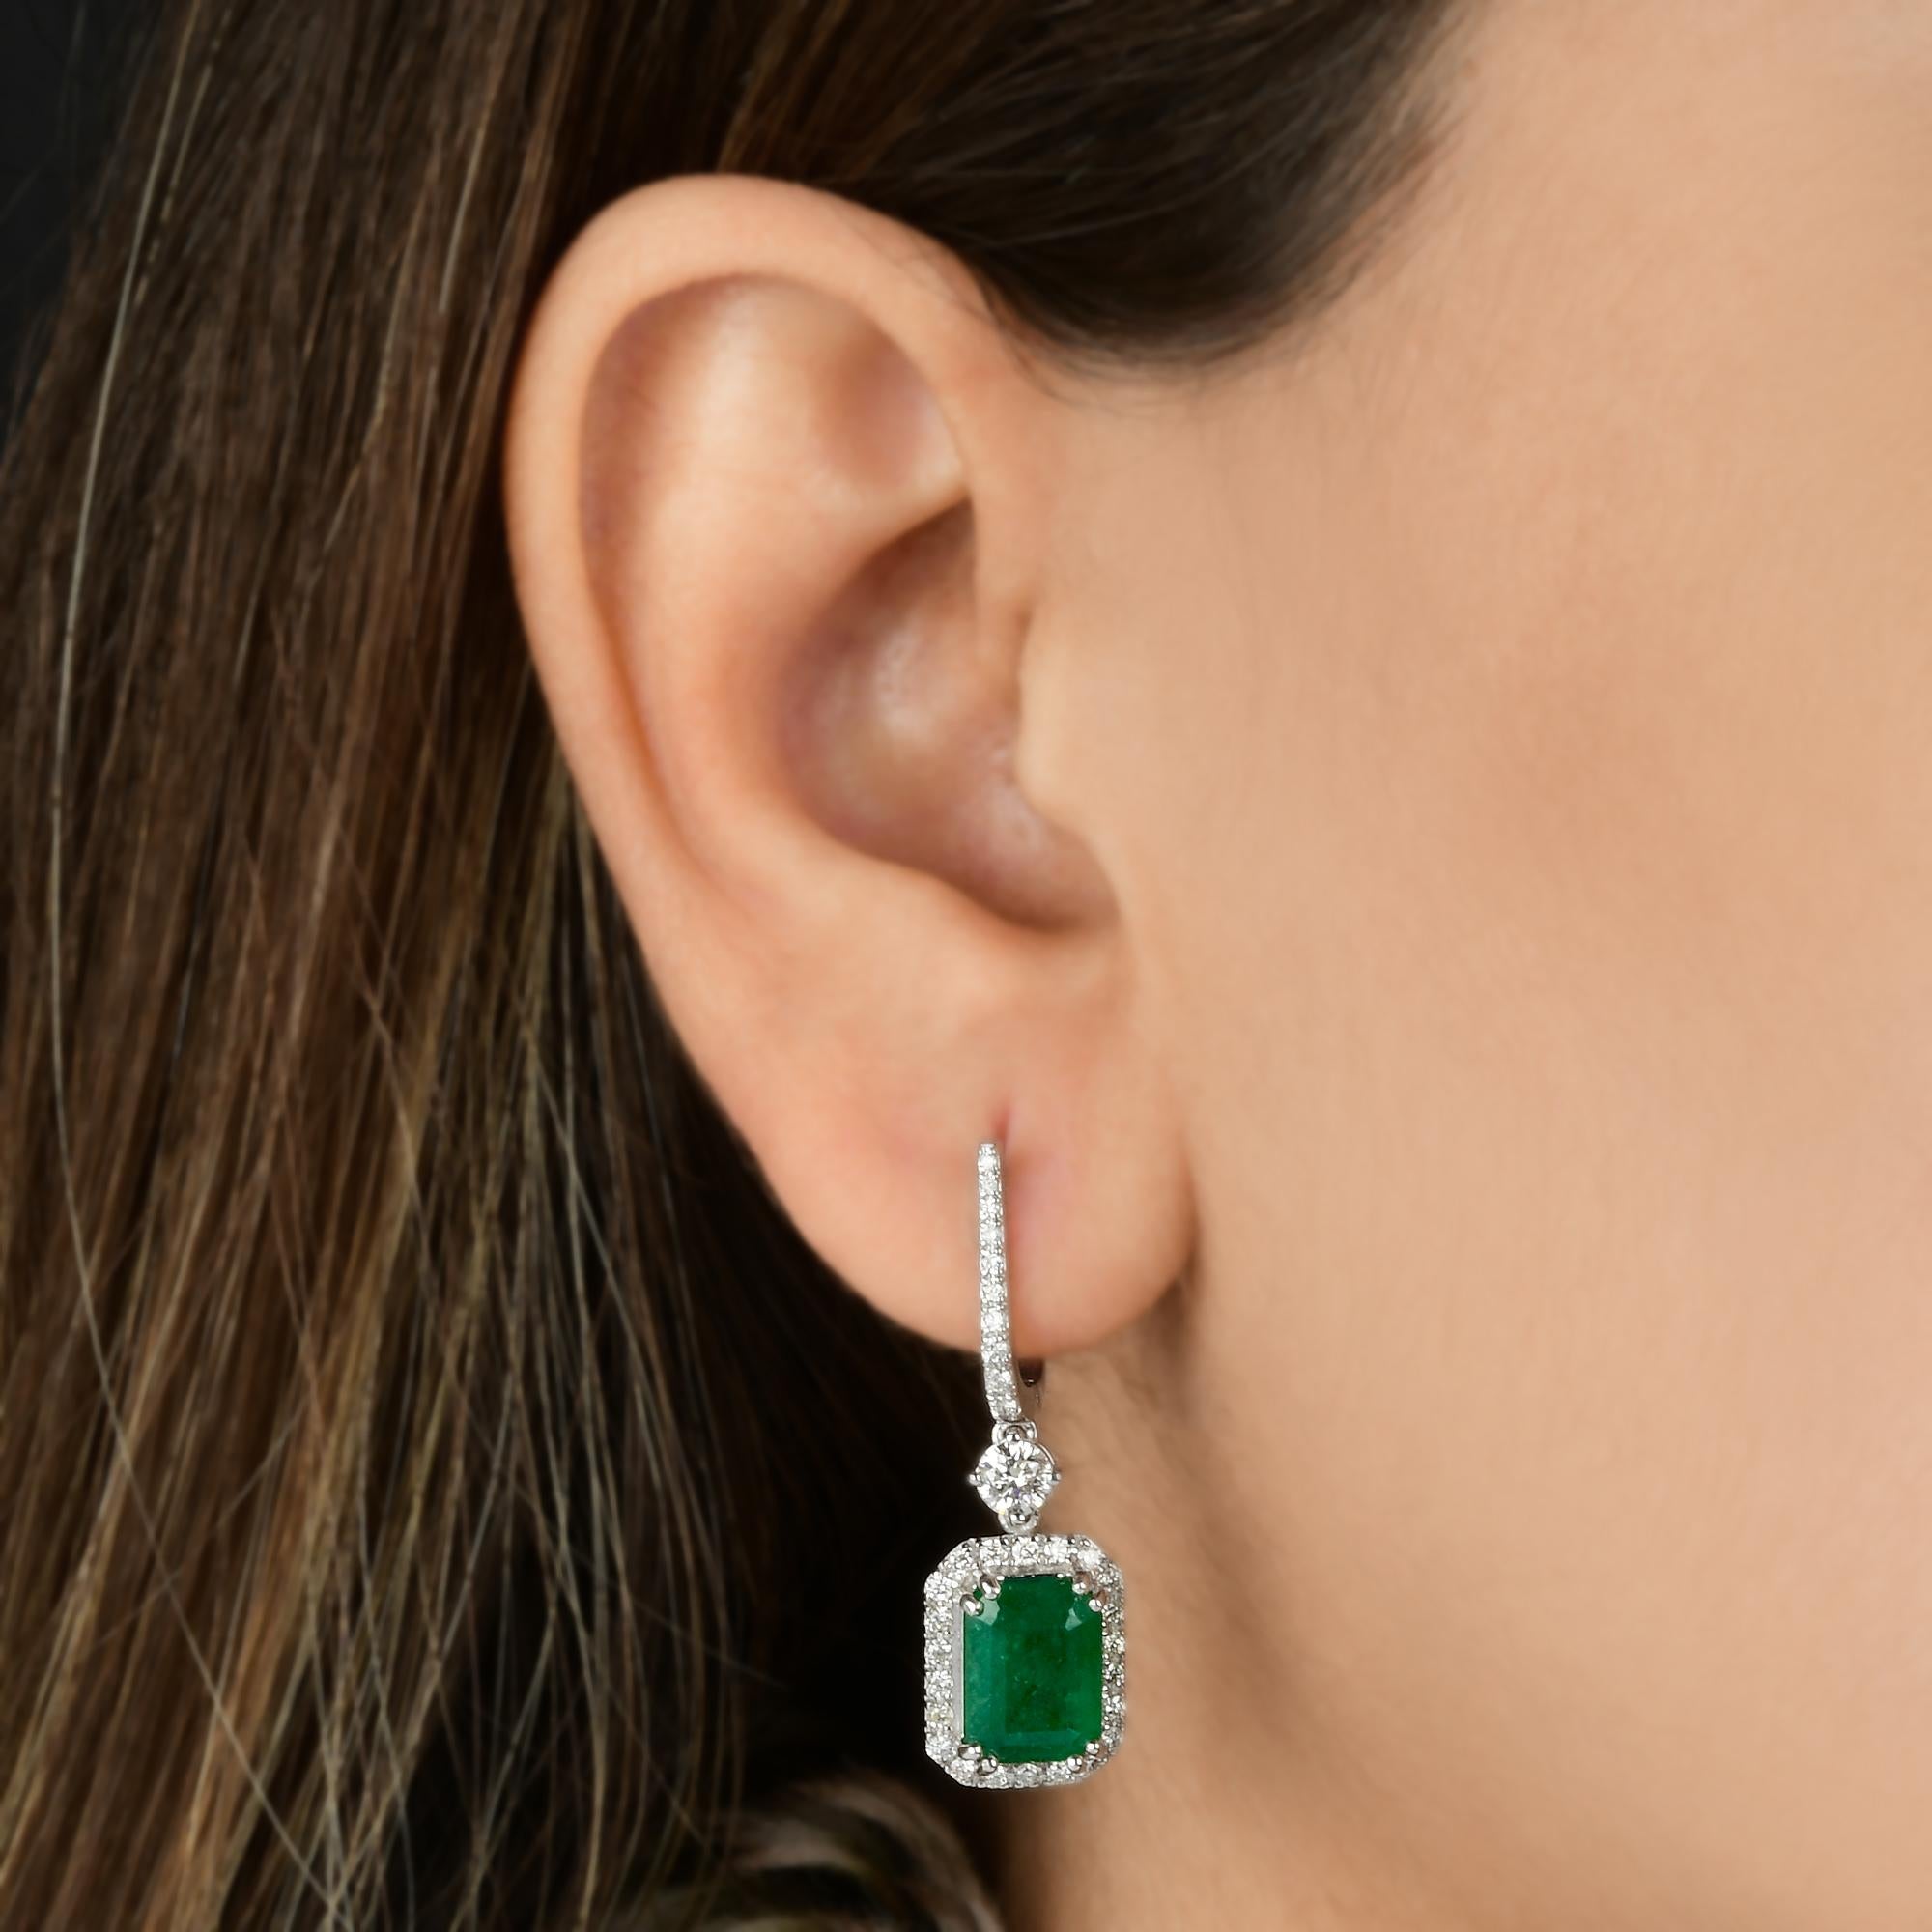 Item Code :- SEE-11717
Gross Weight :- 5.73 grams
14k Solid White Gold Weight :- 4.58 grams
Natural Diamond Weight :- 1.06 carat ( AVERAGE DIAMOND CLARITY SI1-SI2 & COLOR H-I )
Emerald Weight :- 4.72 carat
Earrings Size :- 33 mm approx.

✦